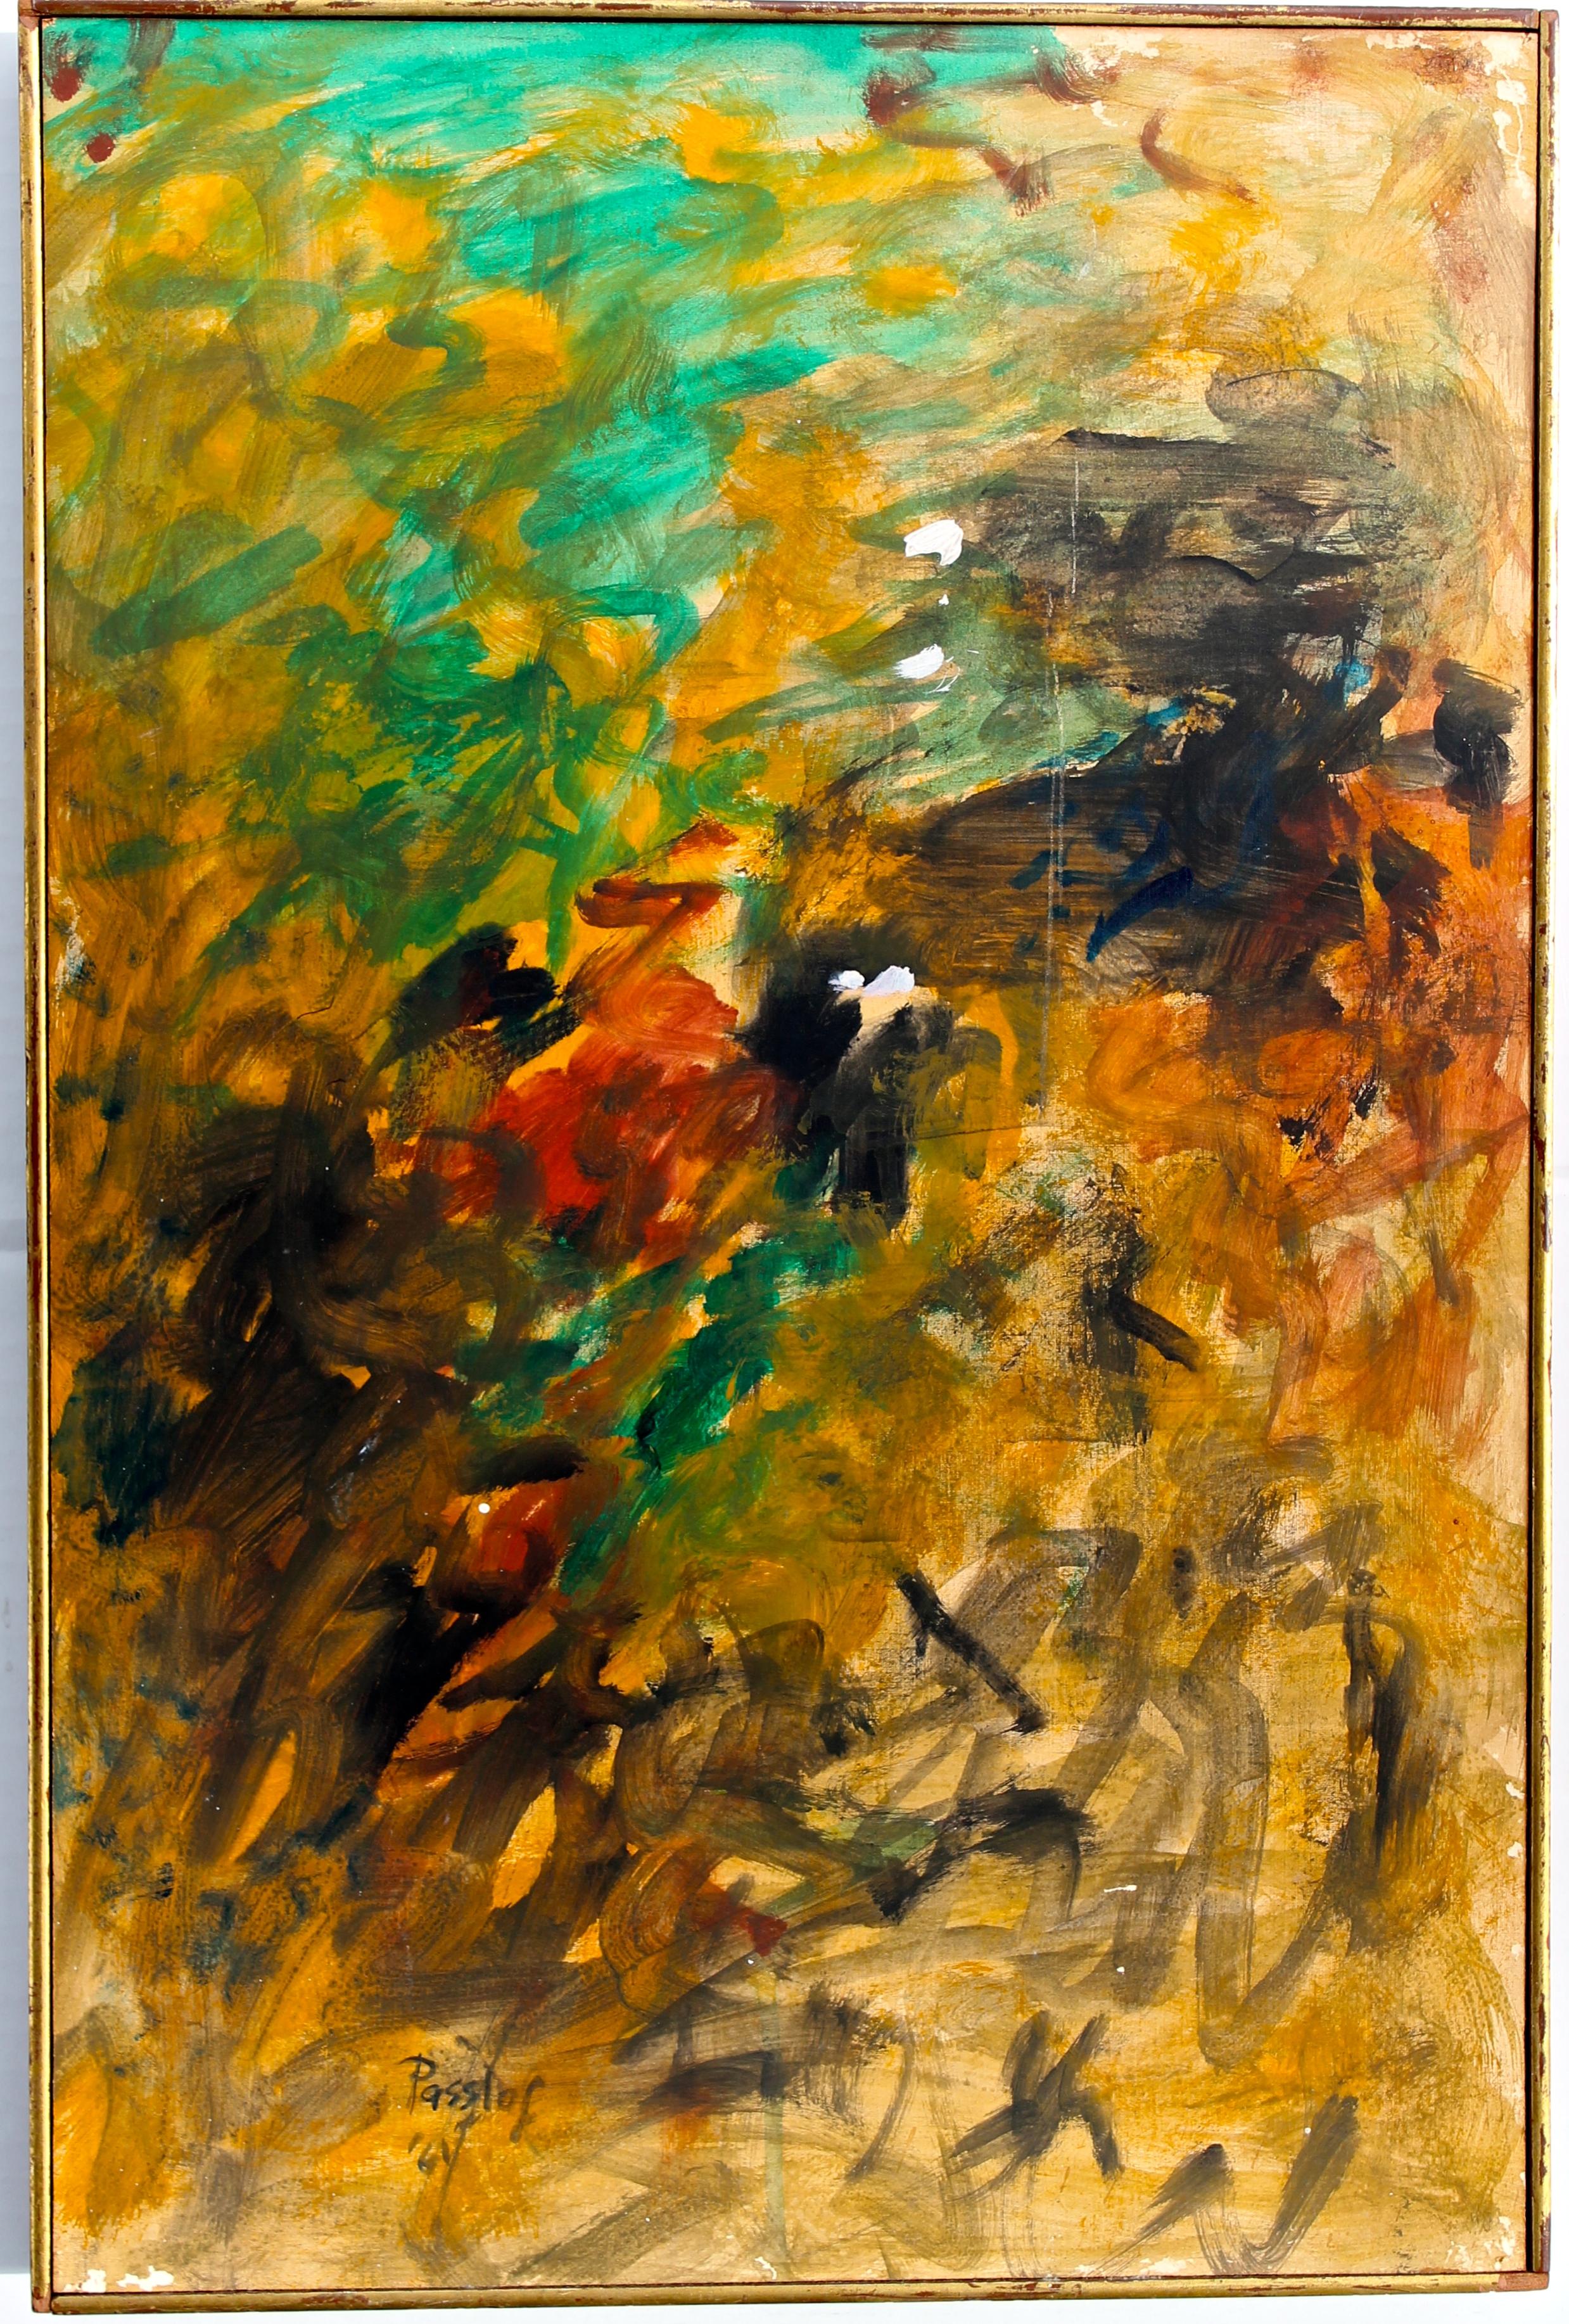 A very fine and expressive small oil on Masonite, framed with thin gilded wood strips. Passlof (1928-2011), an important 'Second Generation' New York School artist was a student of de Kooning at Black Mountain, continued to study with him and was